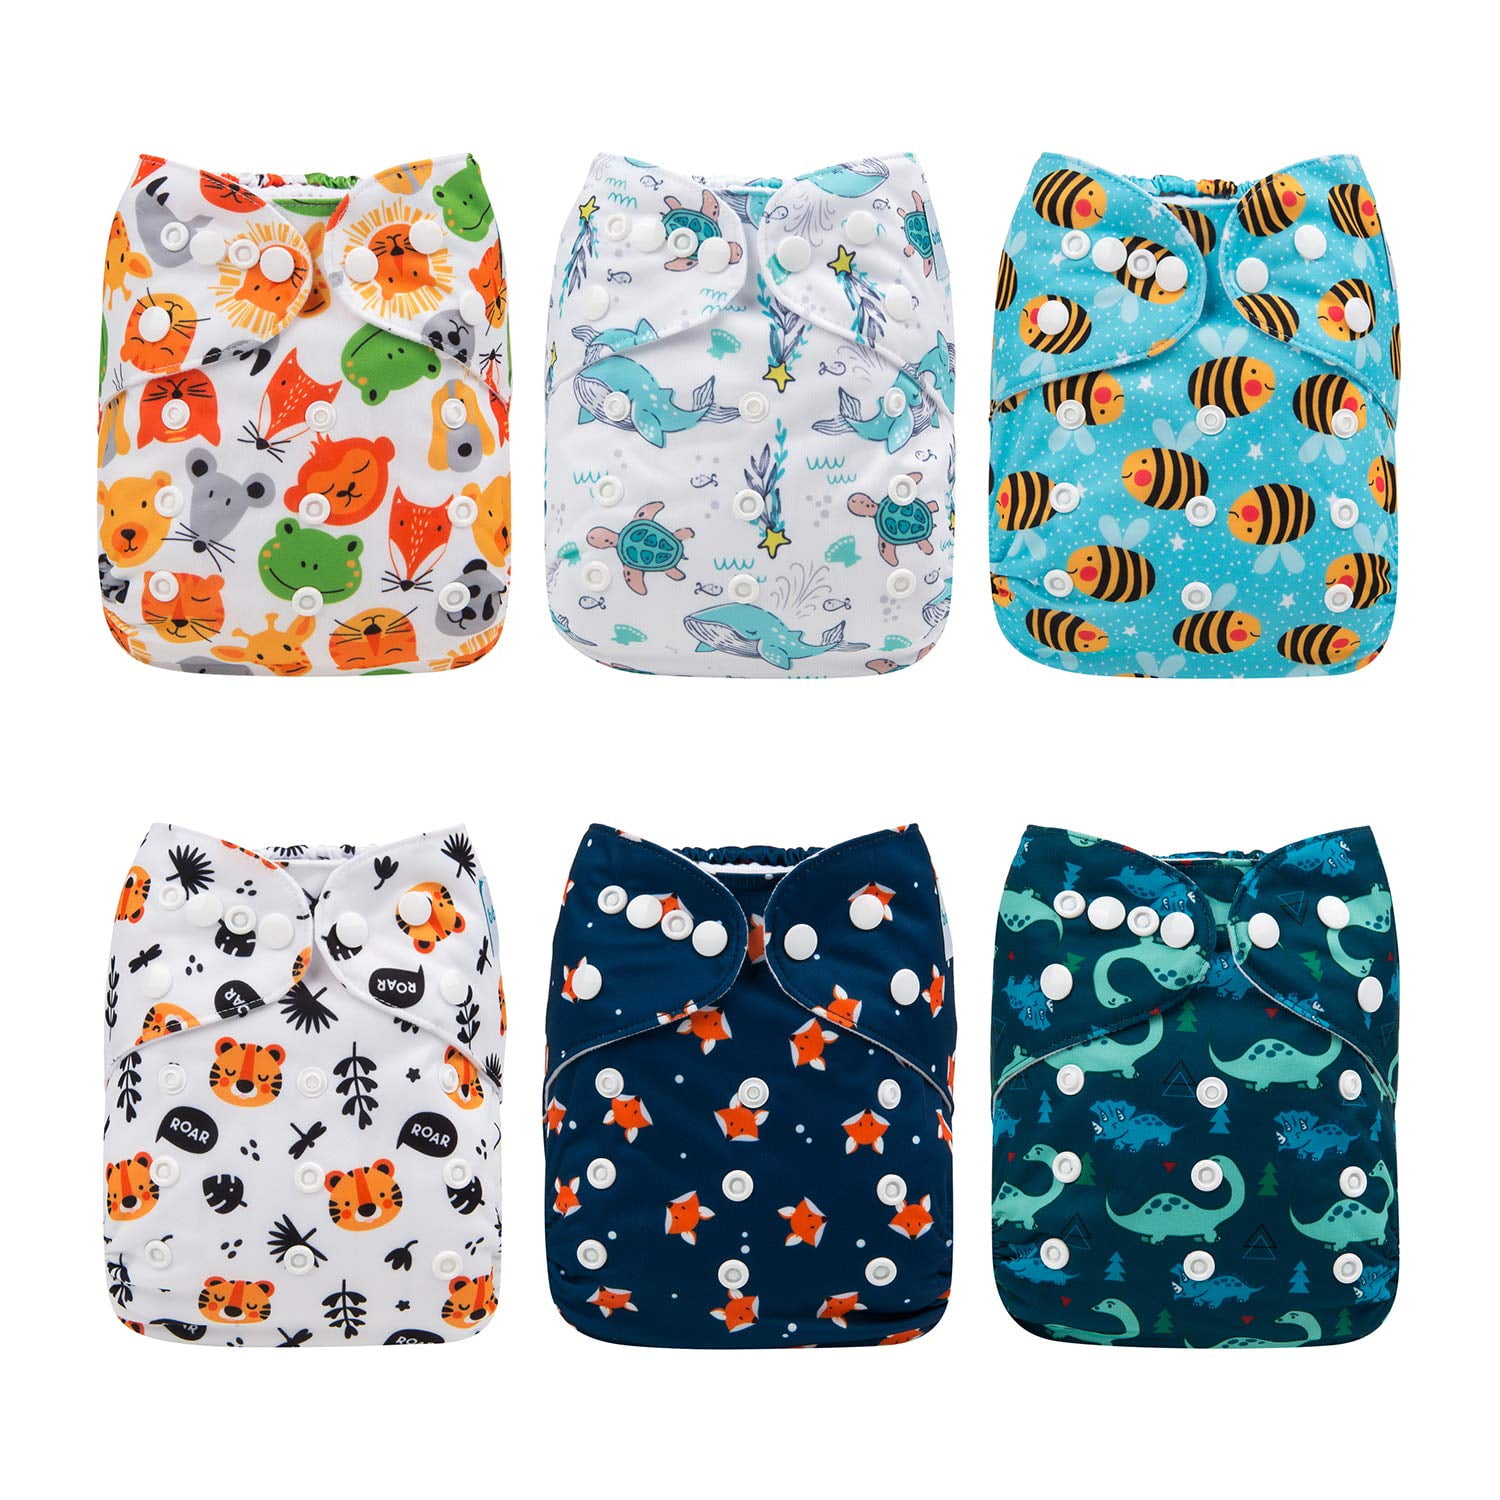 Nappies Cloth New Reusable Bamboo Eco-friendly Baby Nappy Diaper One Size 5 pack 